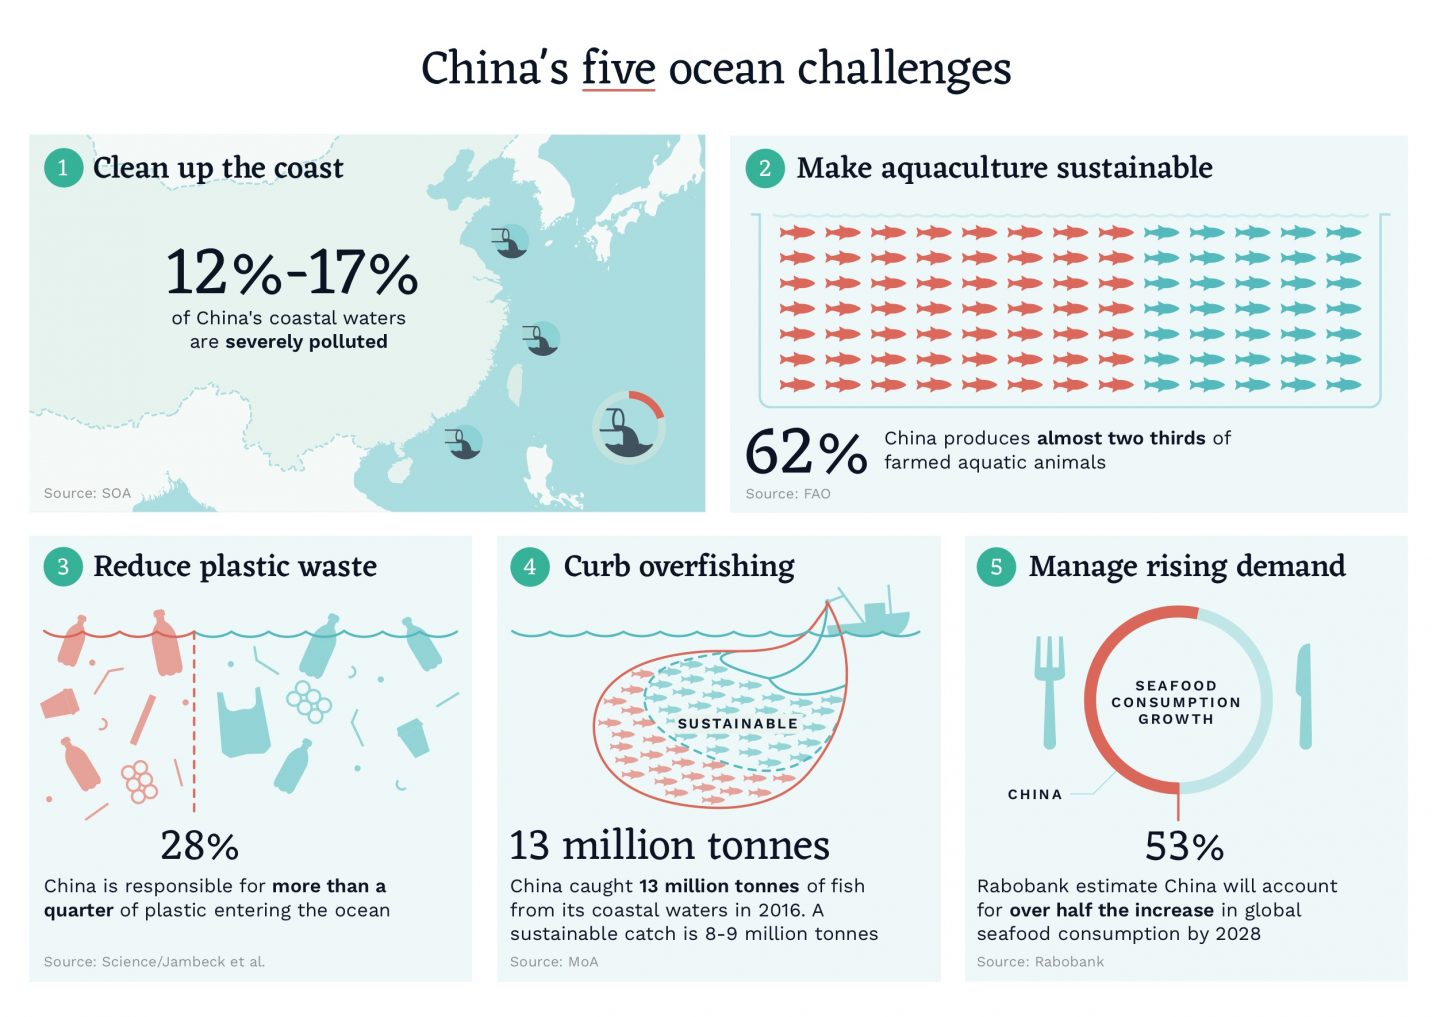 China's five ocean challenges infographic 